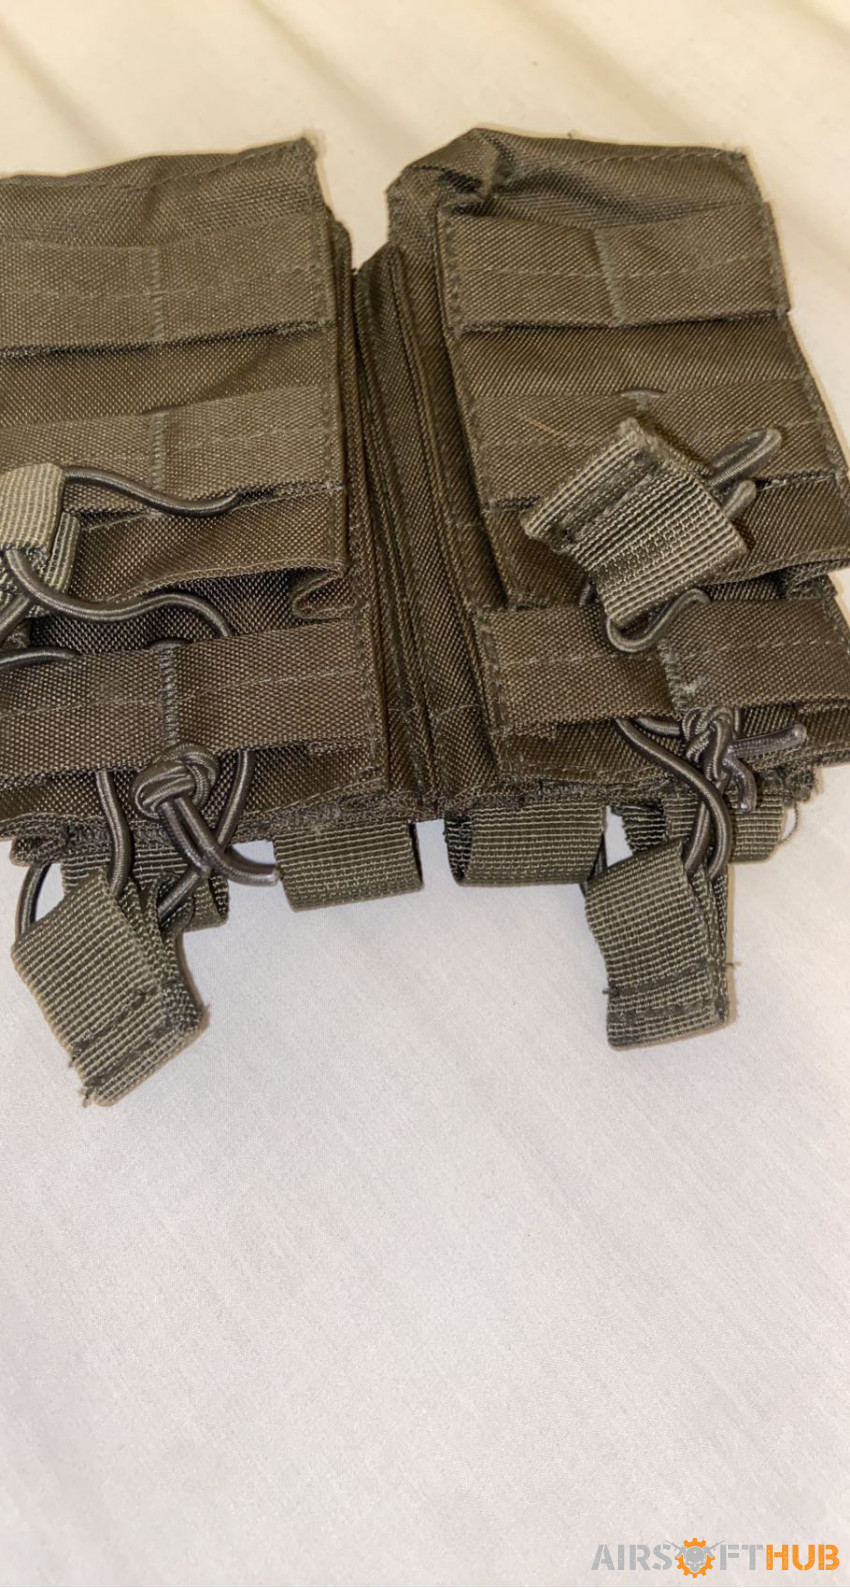 Viper tactical m4 mag pouch - Used airsoft equipment